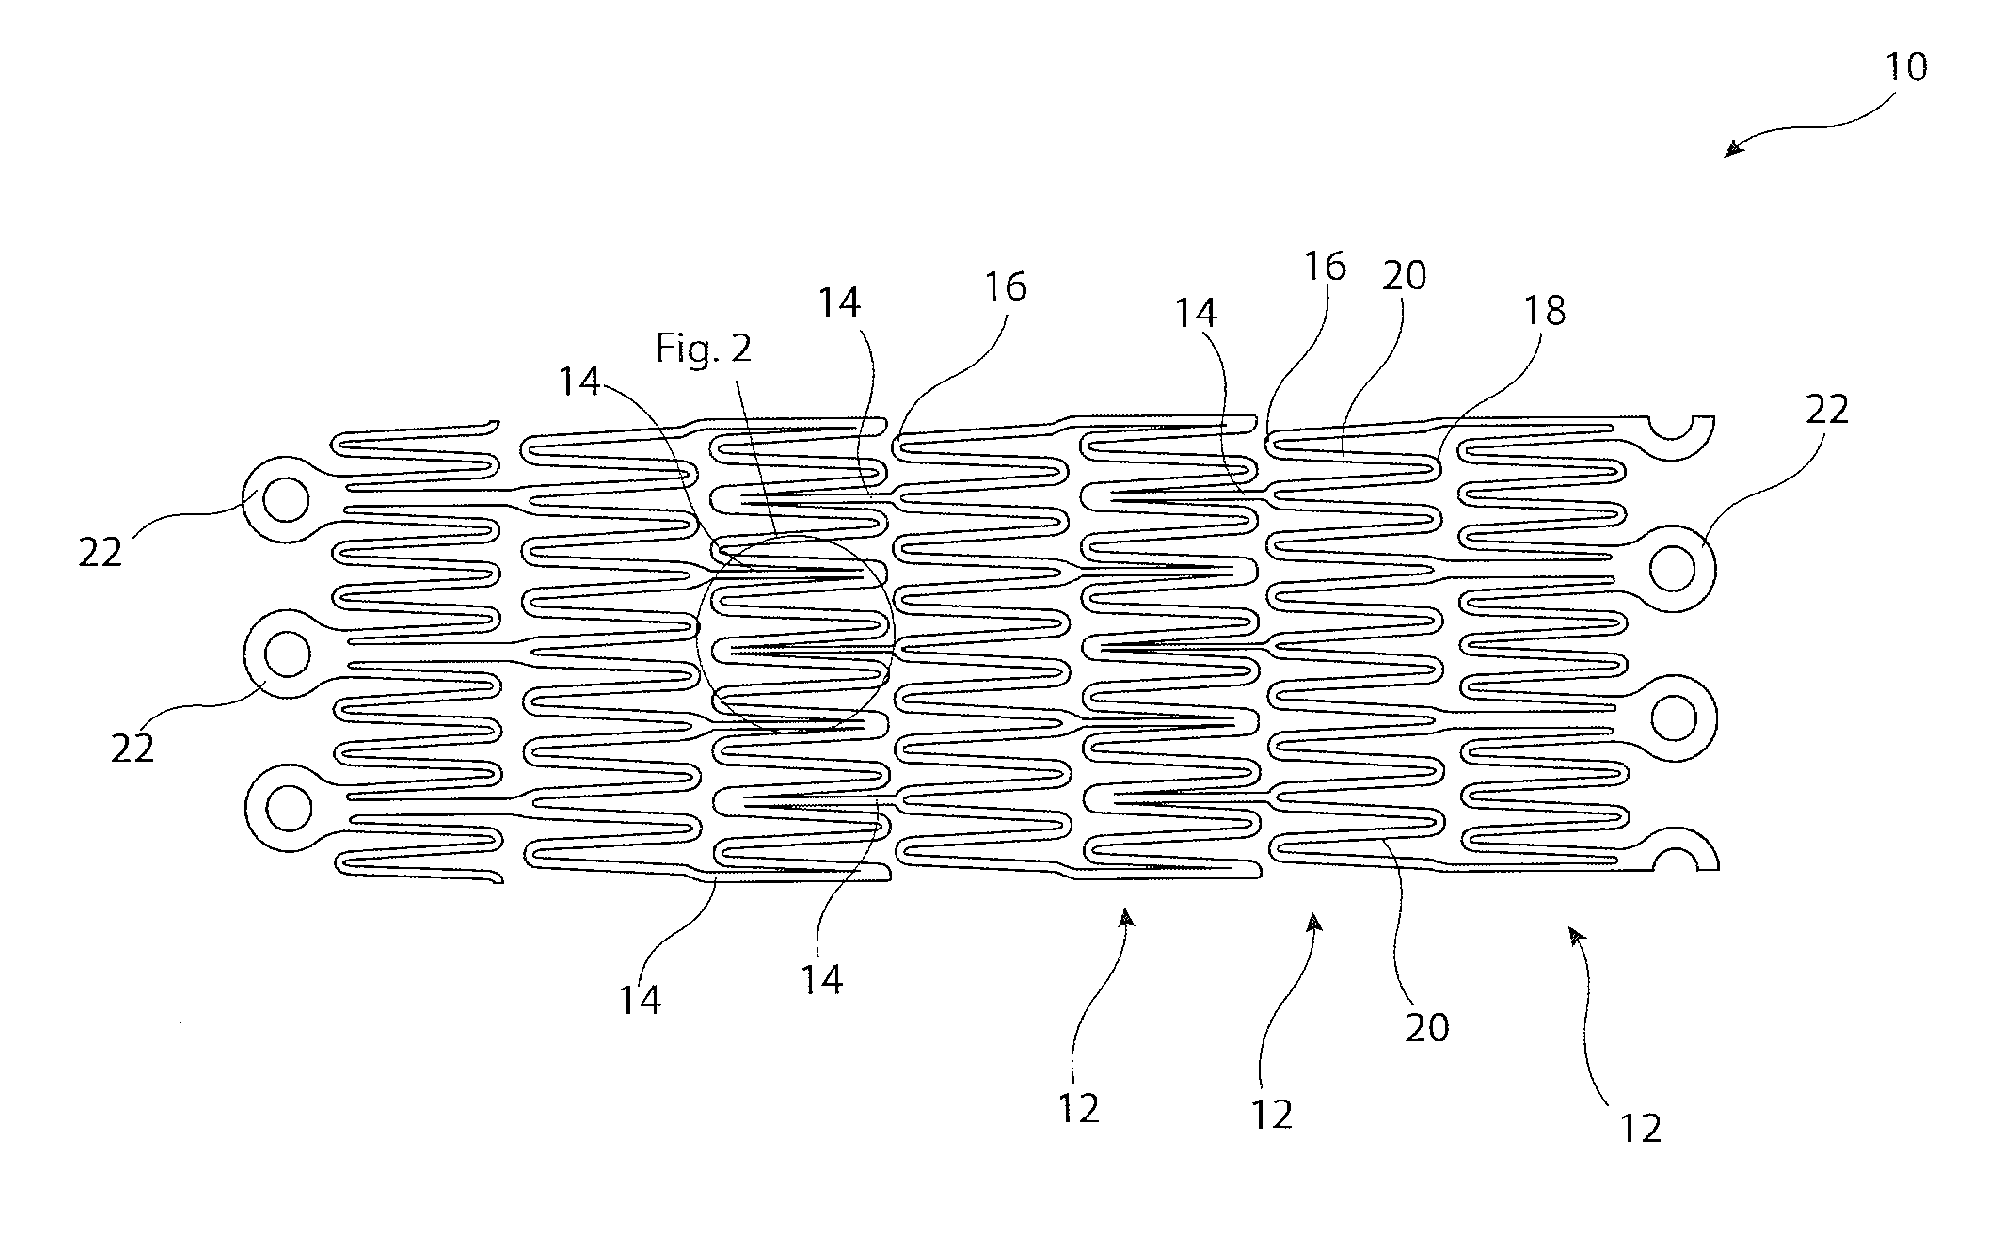 Bioabsorbable stent and implantable medical device